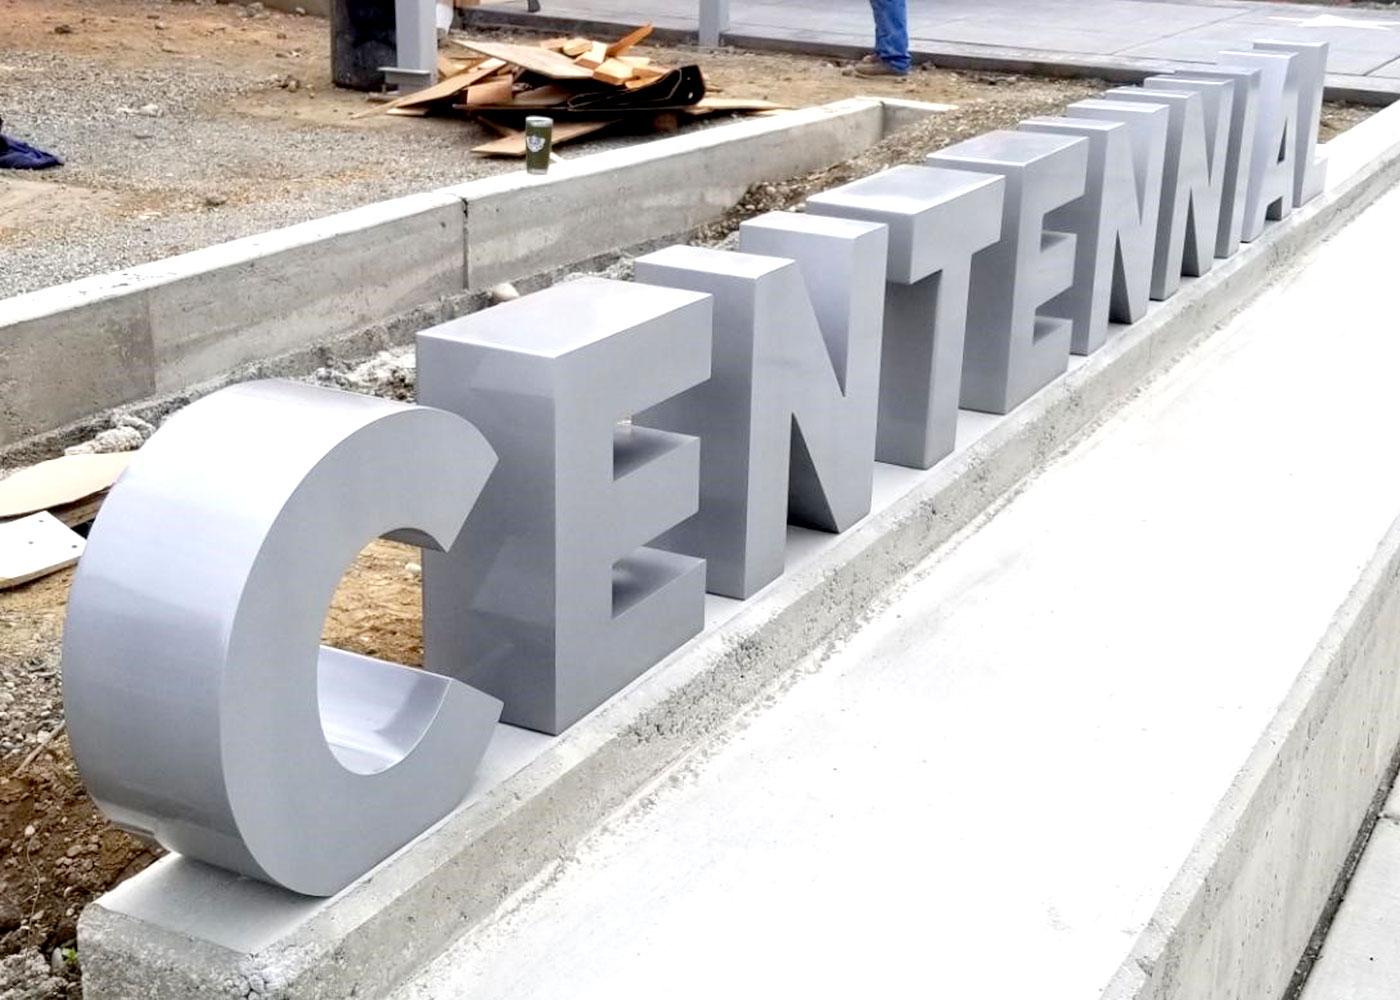 The exterior monument sign for Centennial features dimensional lettering in concrete.